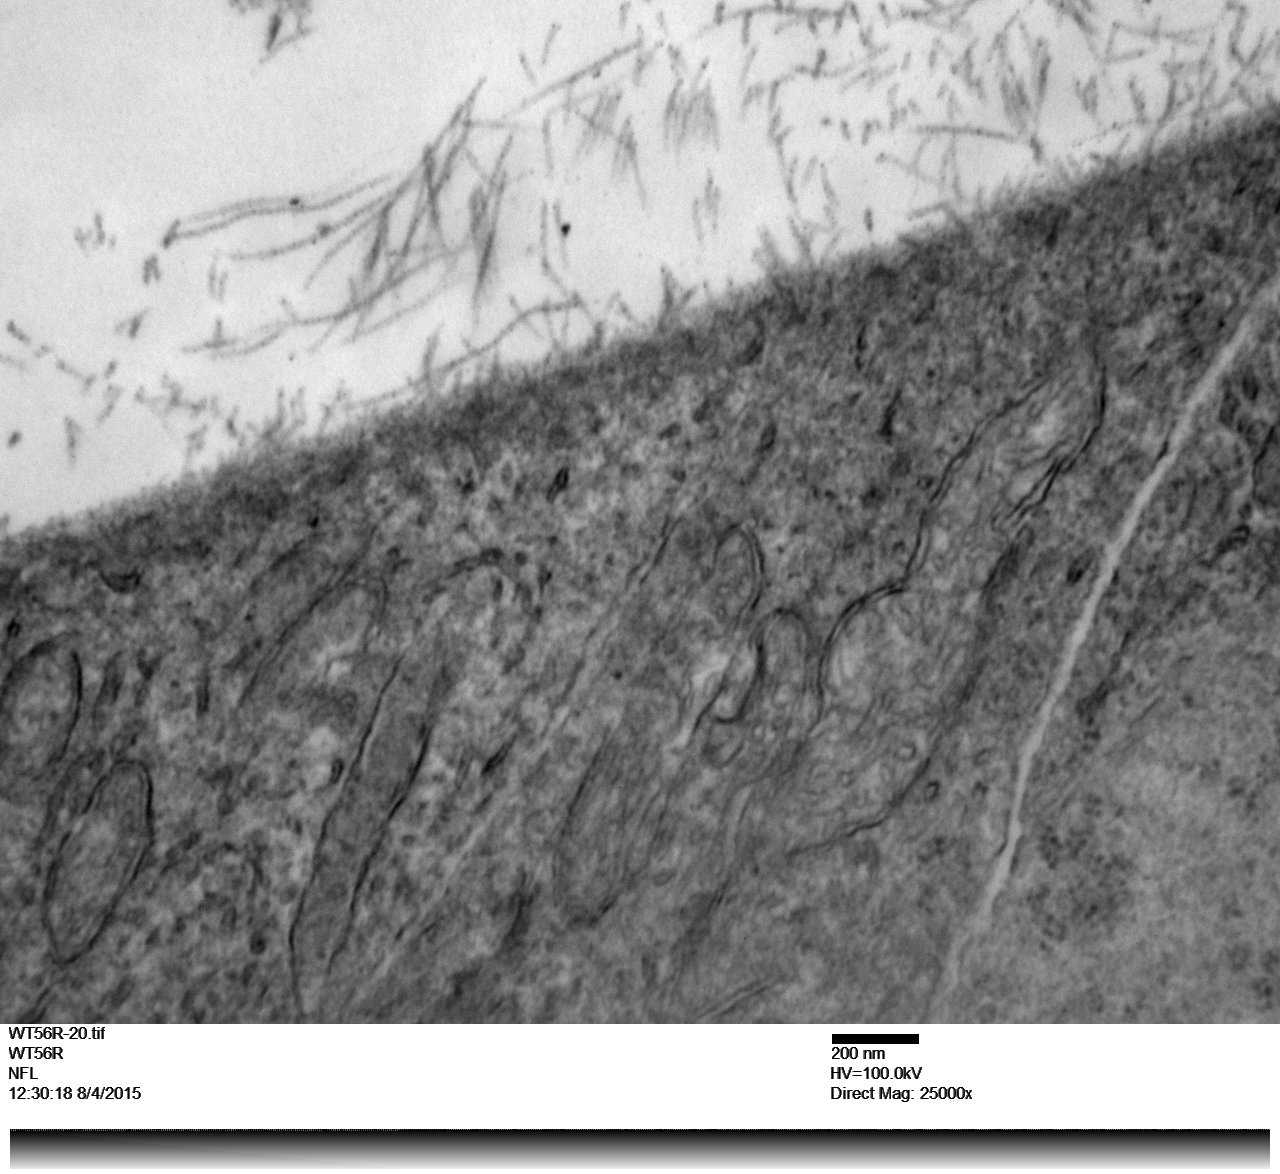 Mouse retina inner limiting membrane showing fibers from the vitrious humor